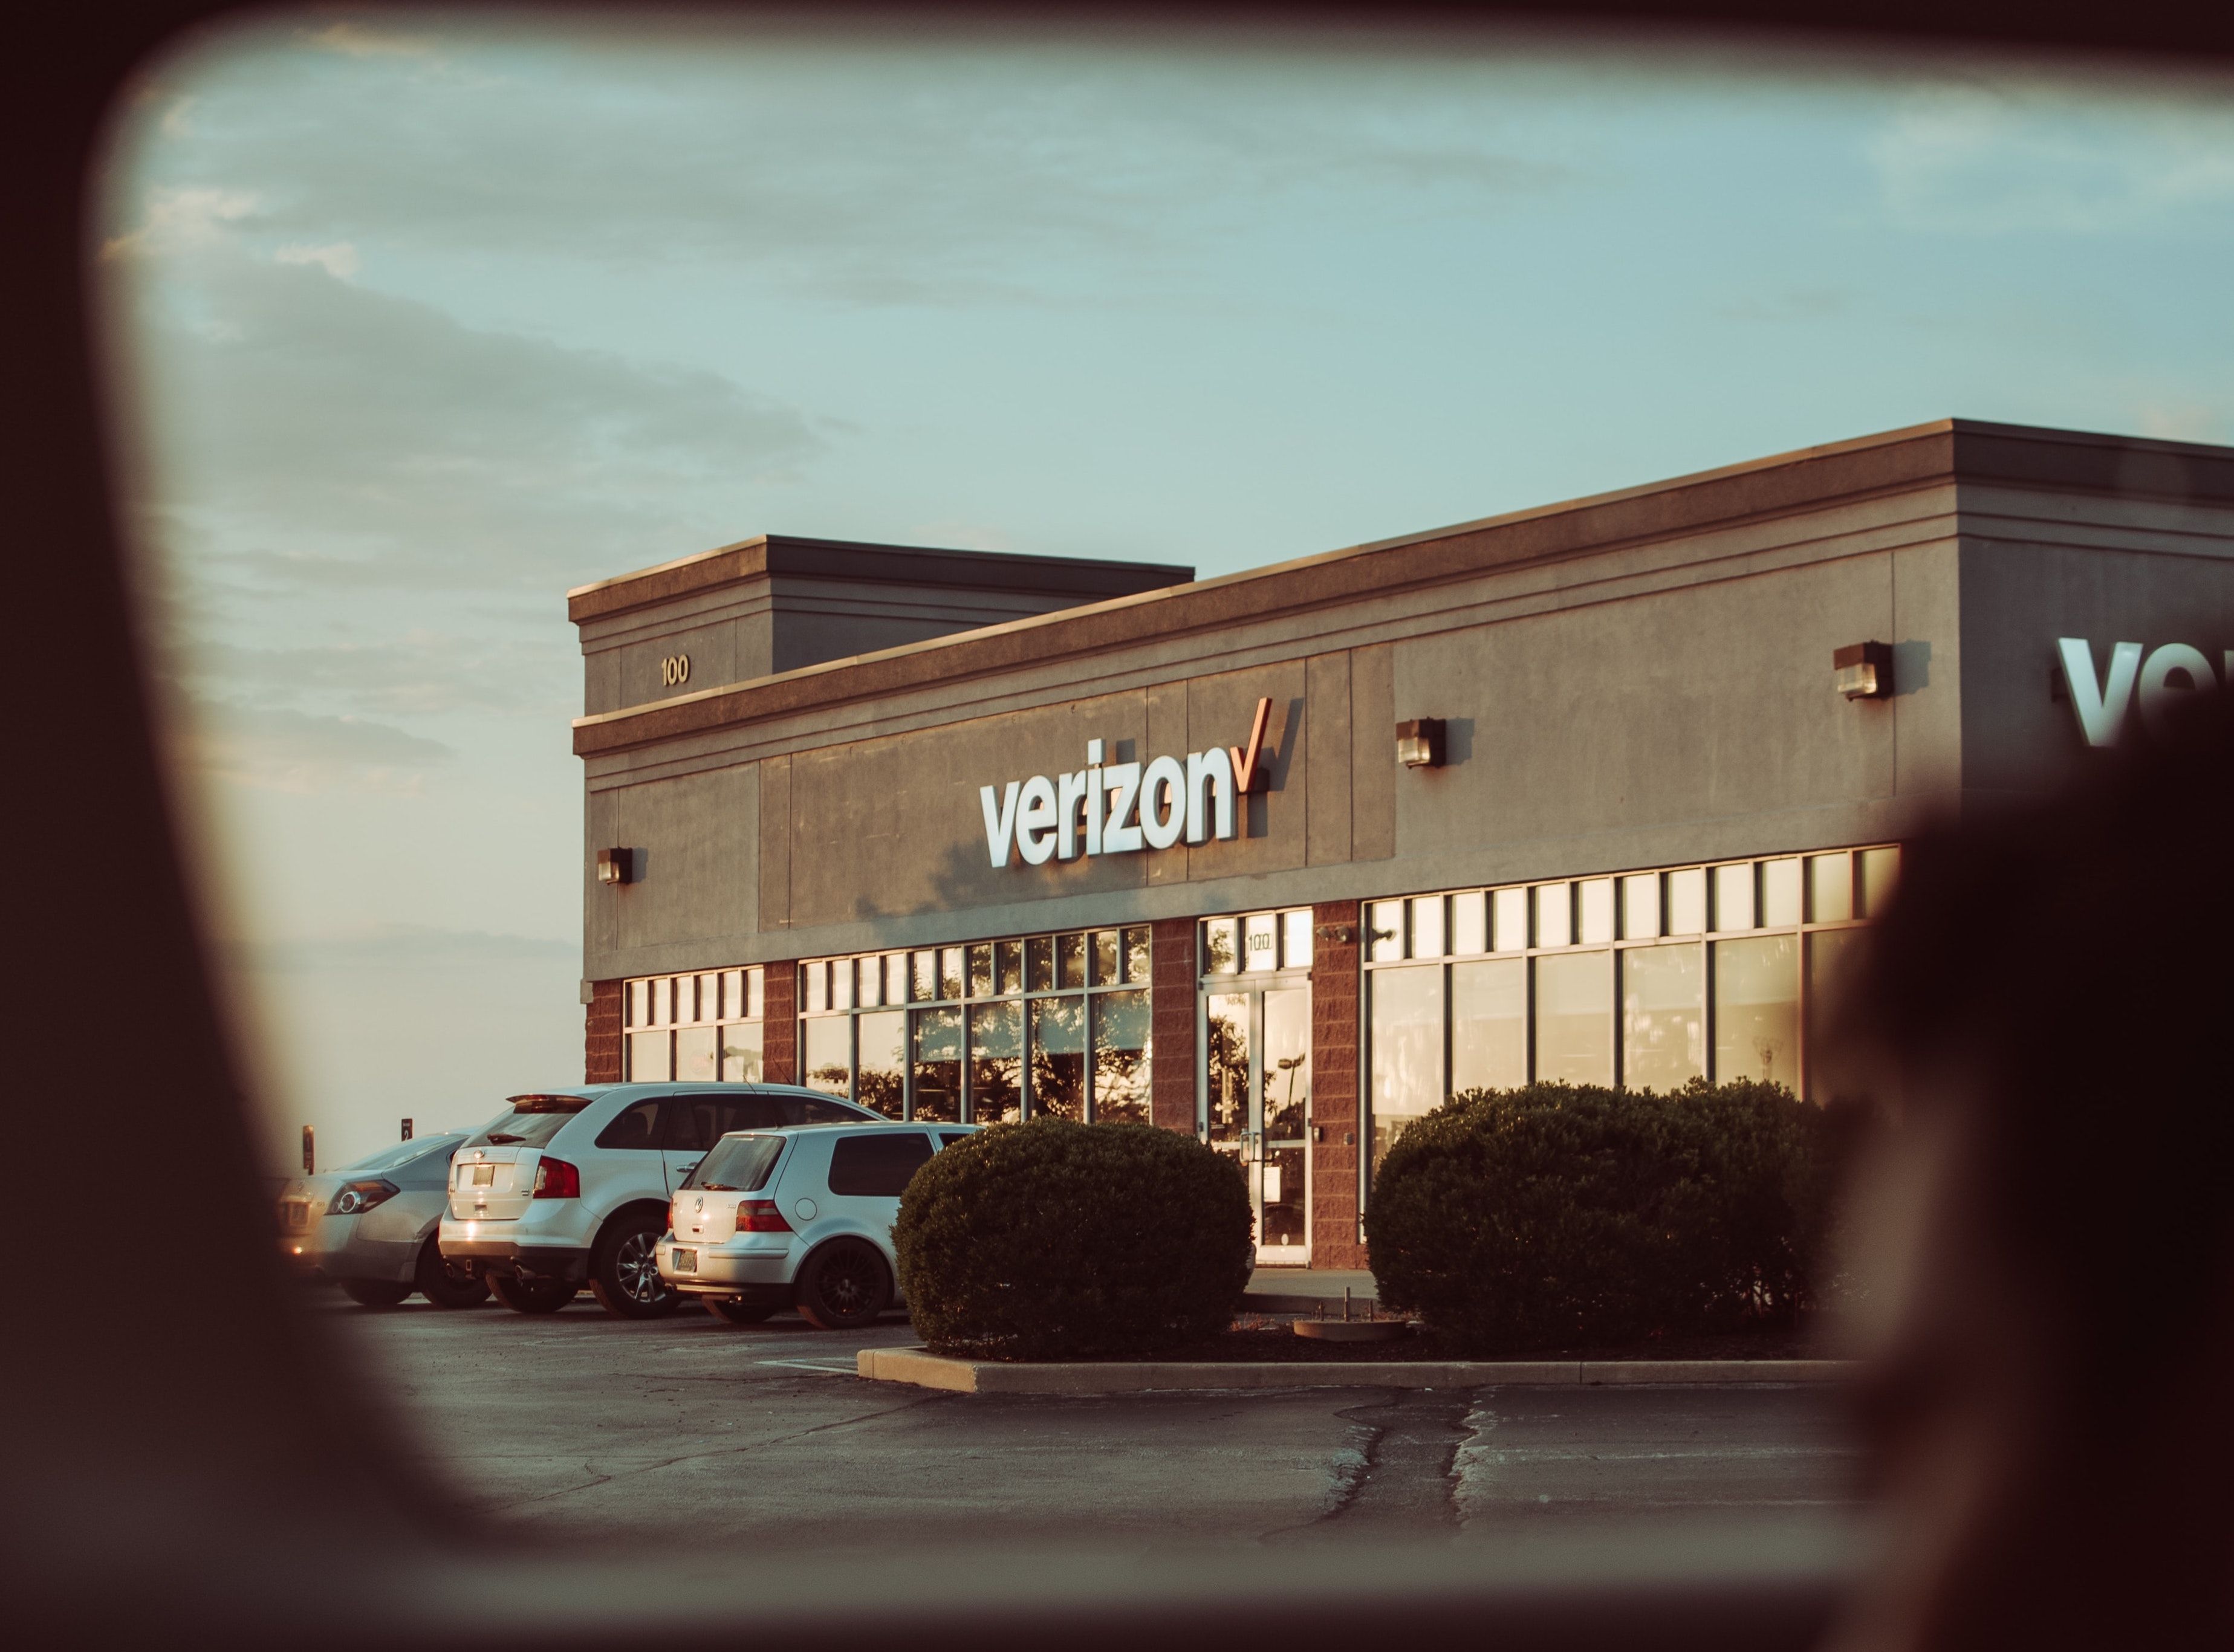 Veiew of a Verizon store at sunset.